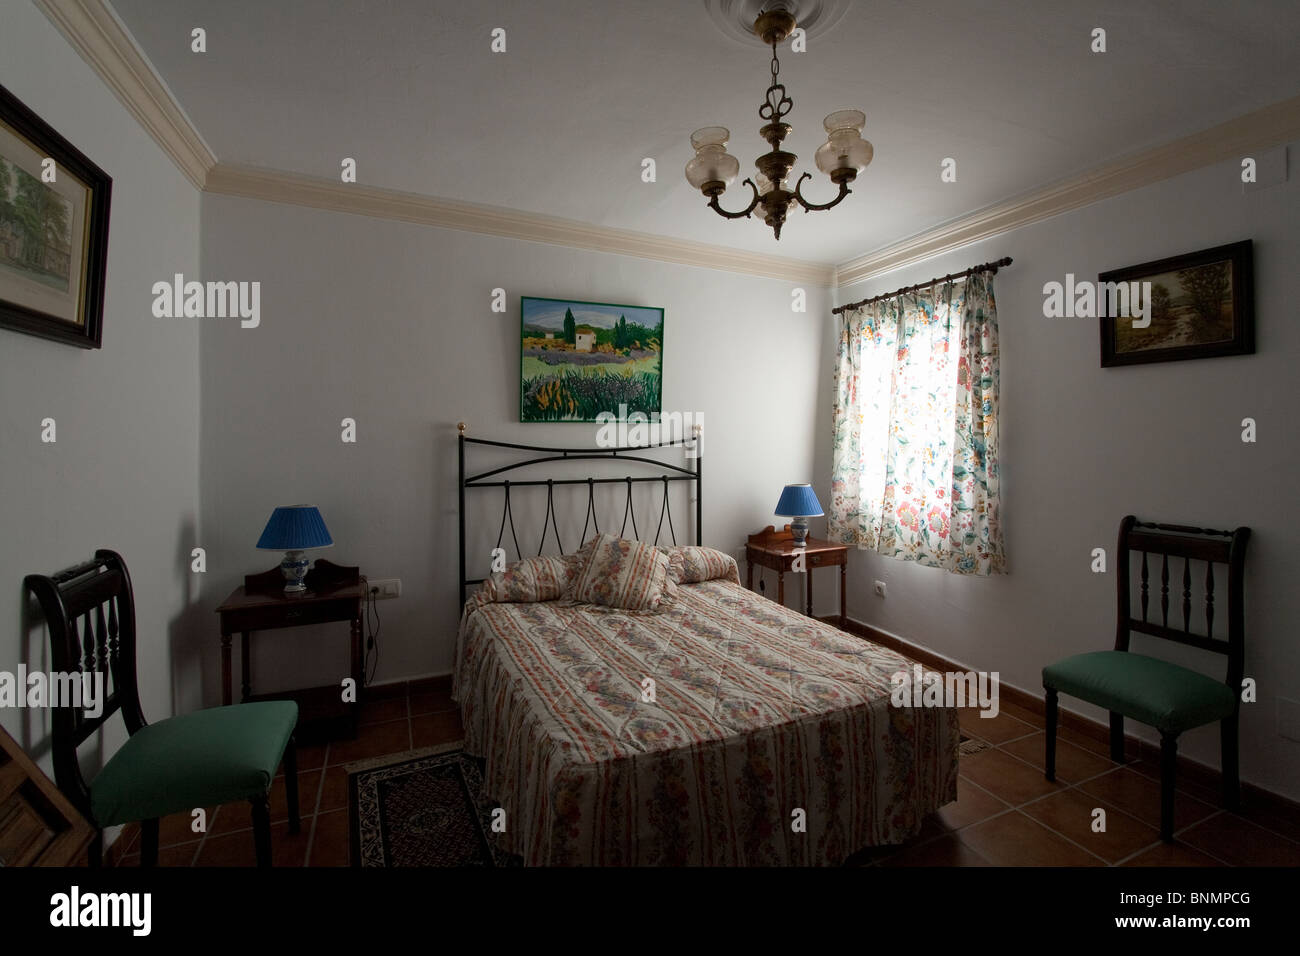 A bedroom in a traditional spanish house Stock Photo